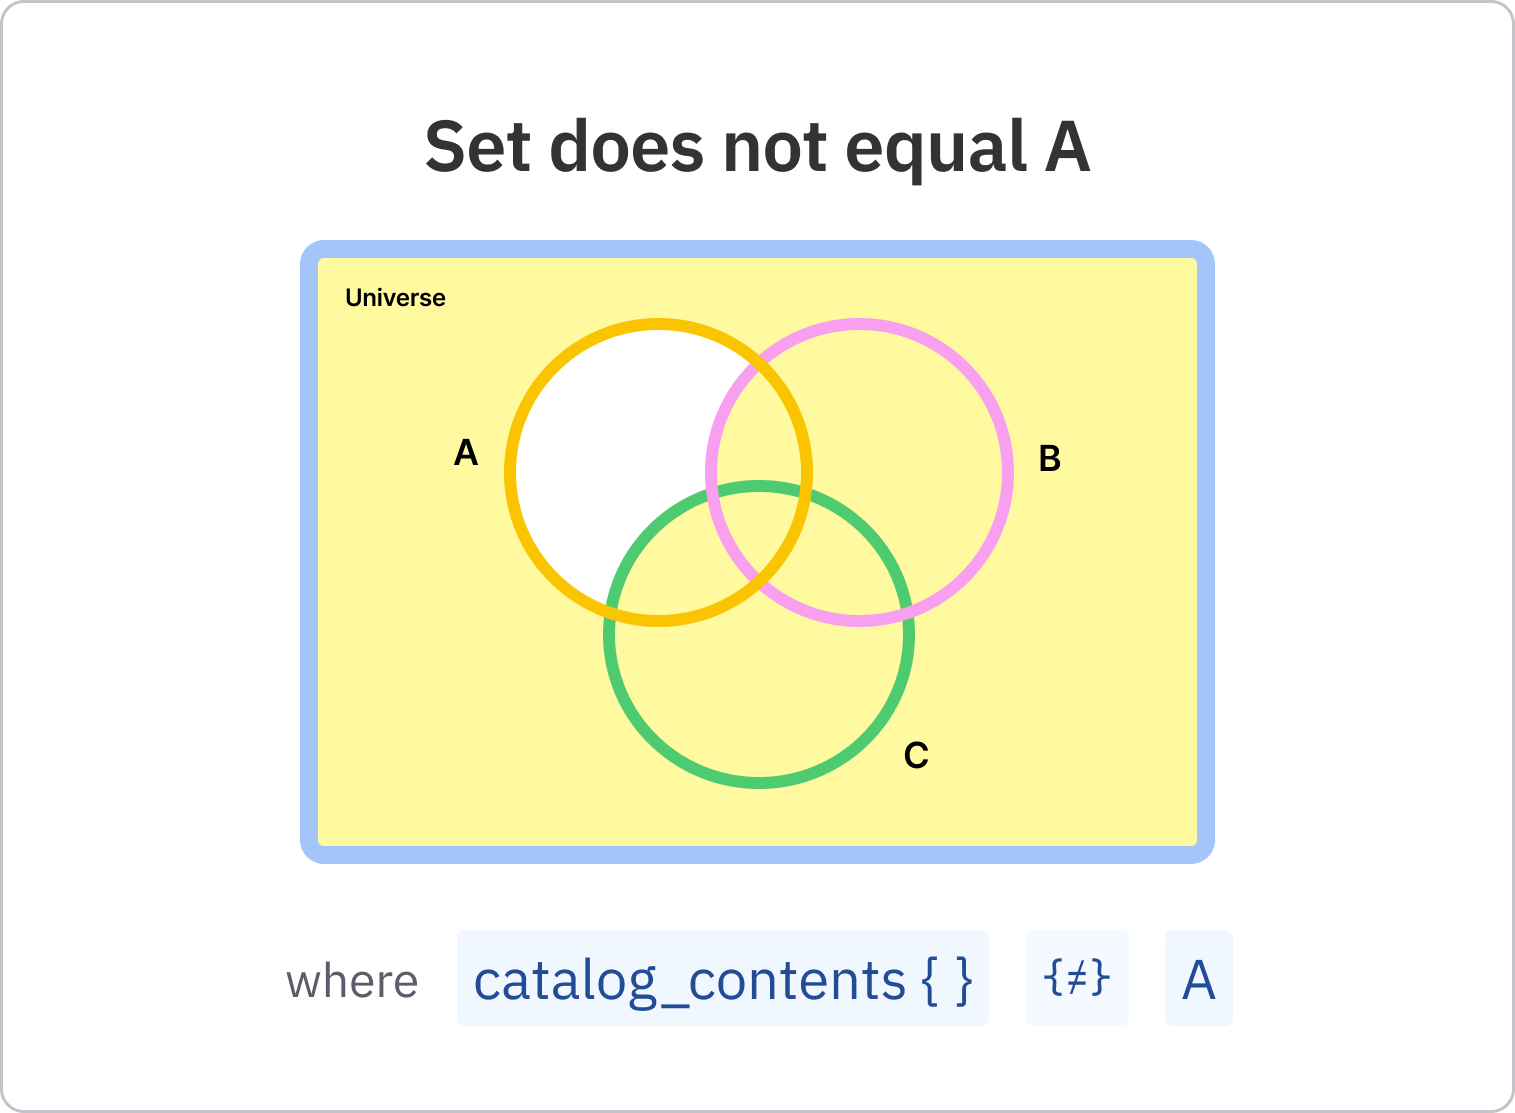 19_-_Set_does_not_equal_A.png